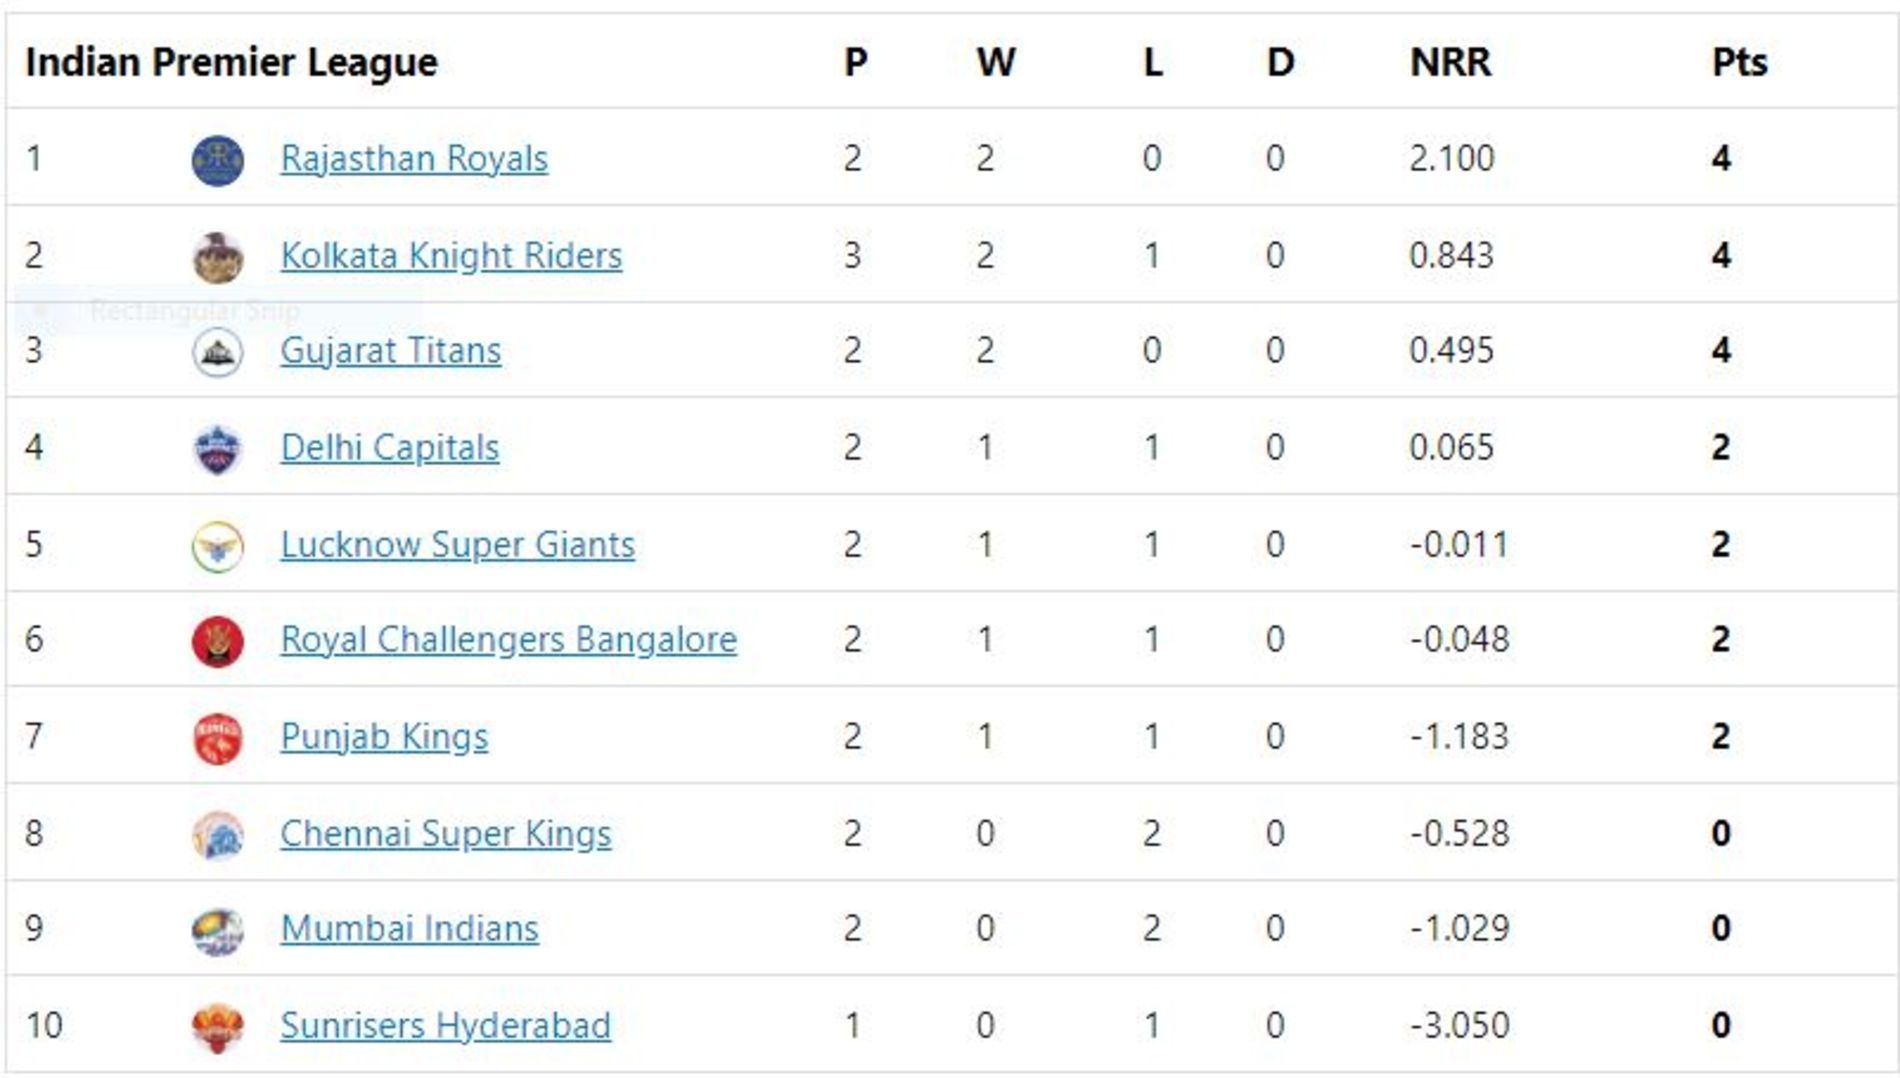 Gujarat Titans move into the third spot of the IPL 2022 points table